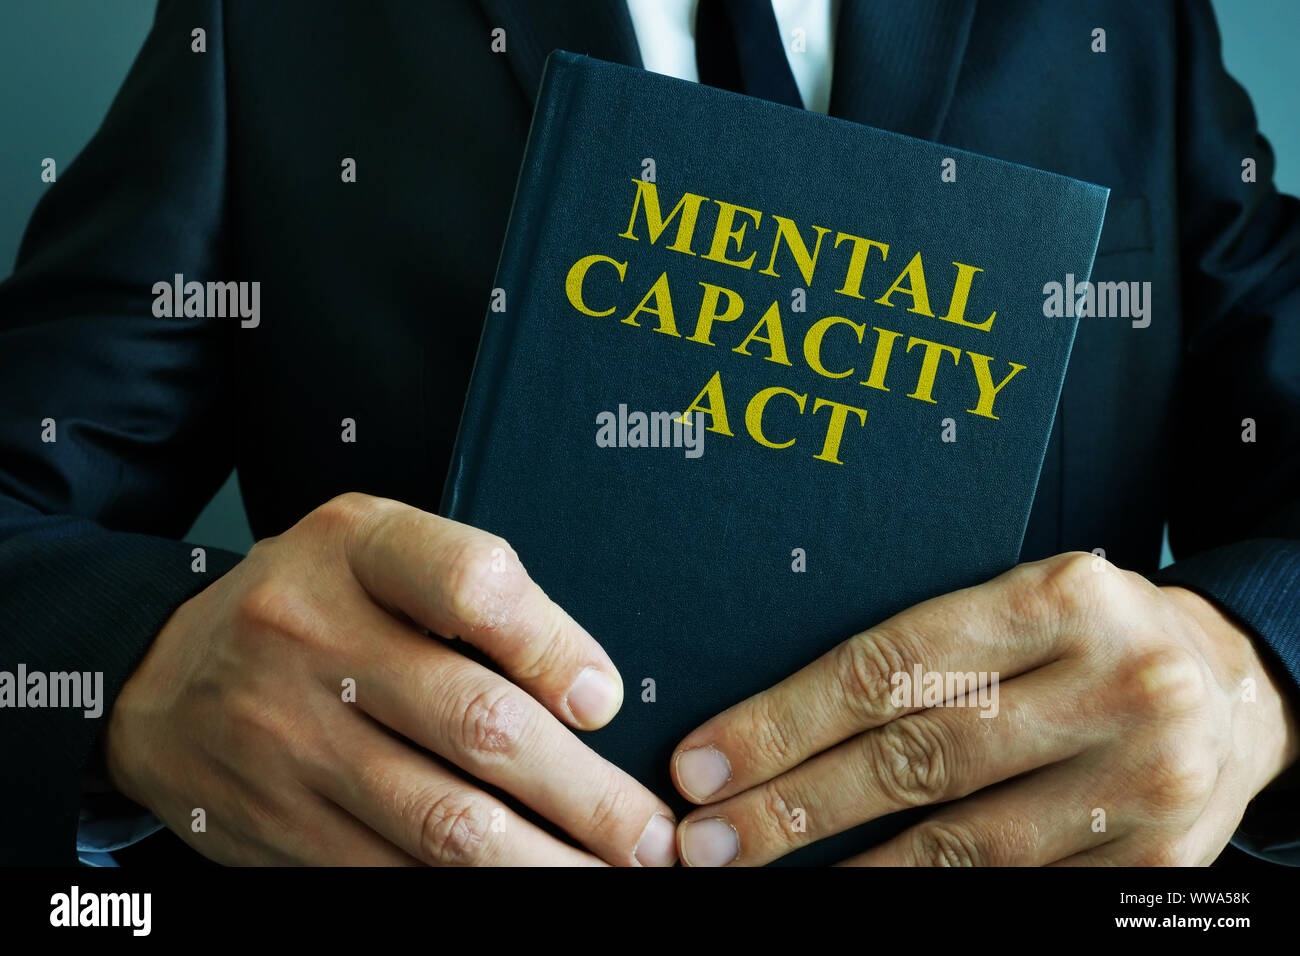 Man is holding mental capacity act. Stock Photo